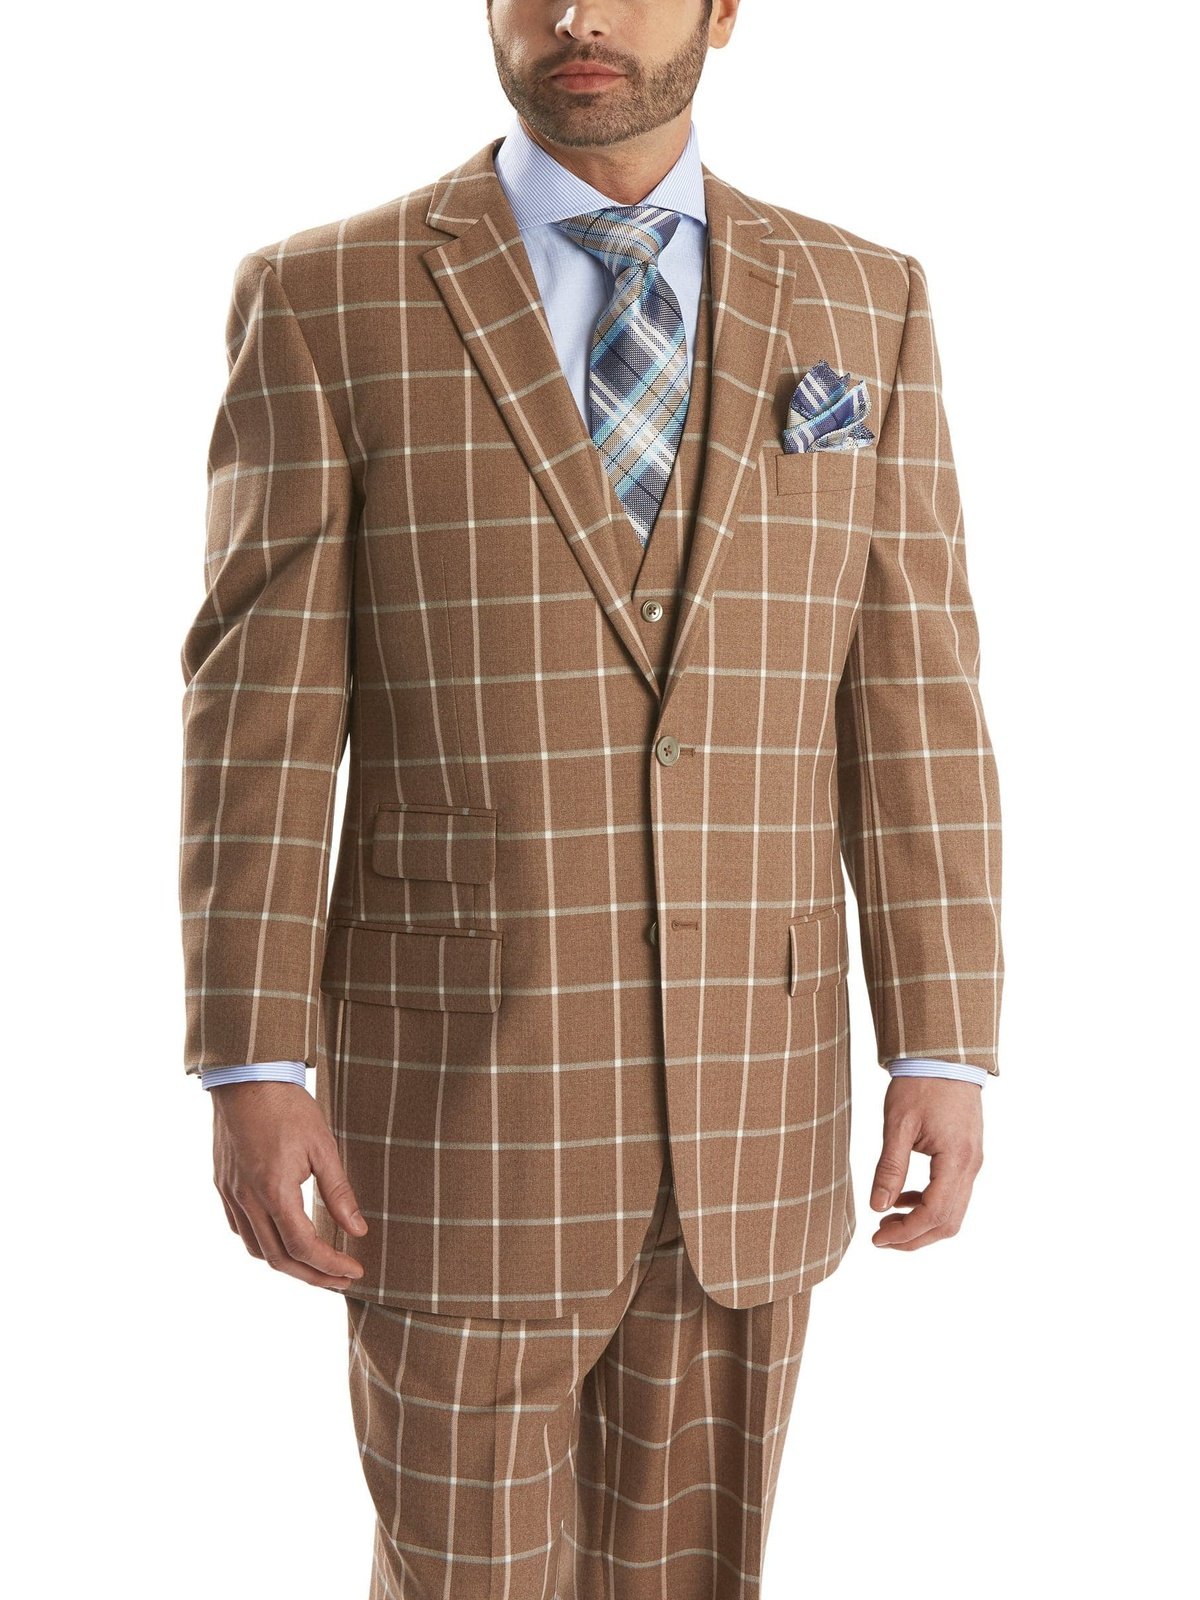 Steven Land Sale Suits 48R Steven Land Classic Fit Brown Windowpane Three Piece Pleated Wool Suit